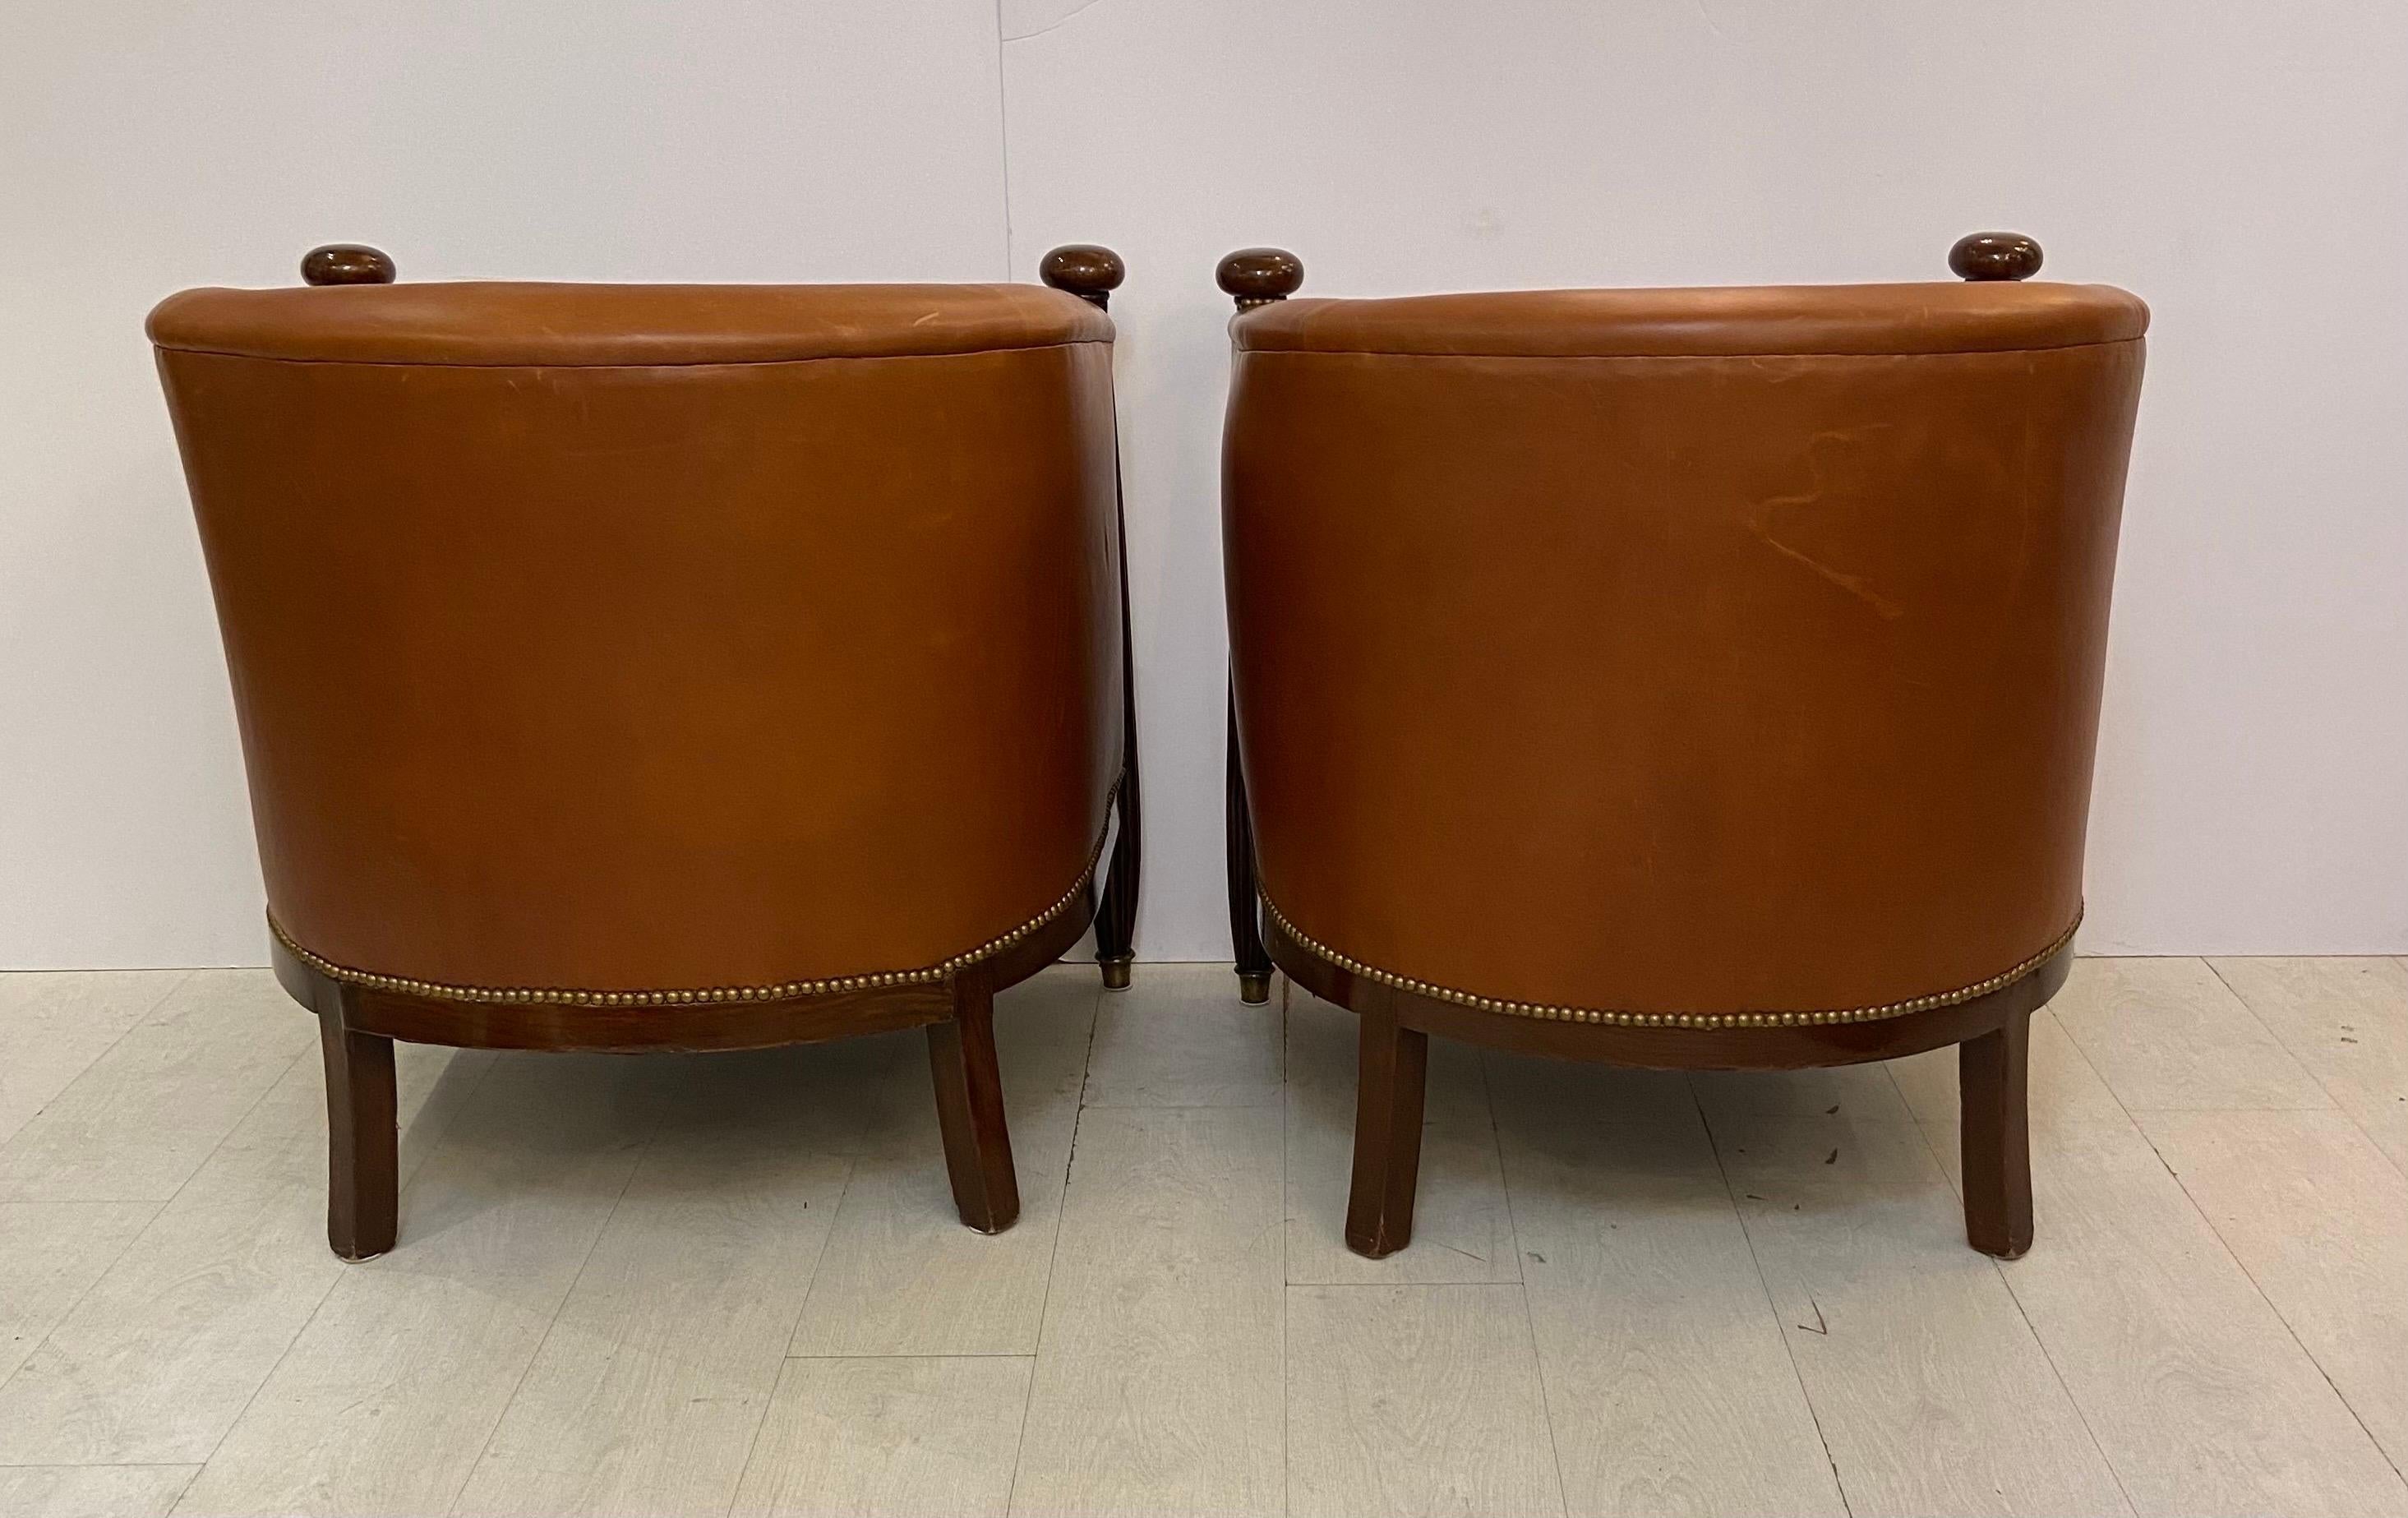 20th Century Pair of French Art Deco Mahogany Barrel Chairs Upholstered in Fine Leather 